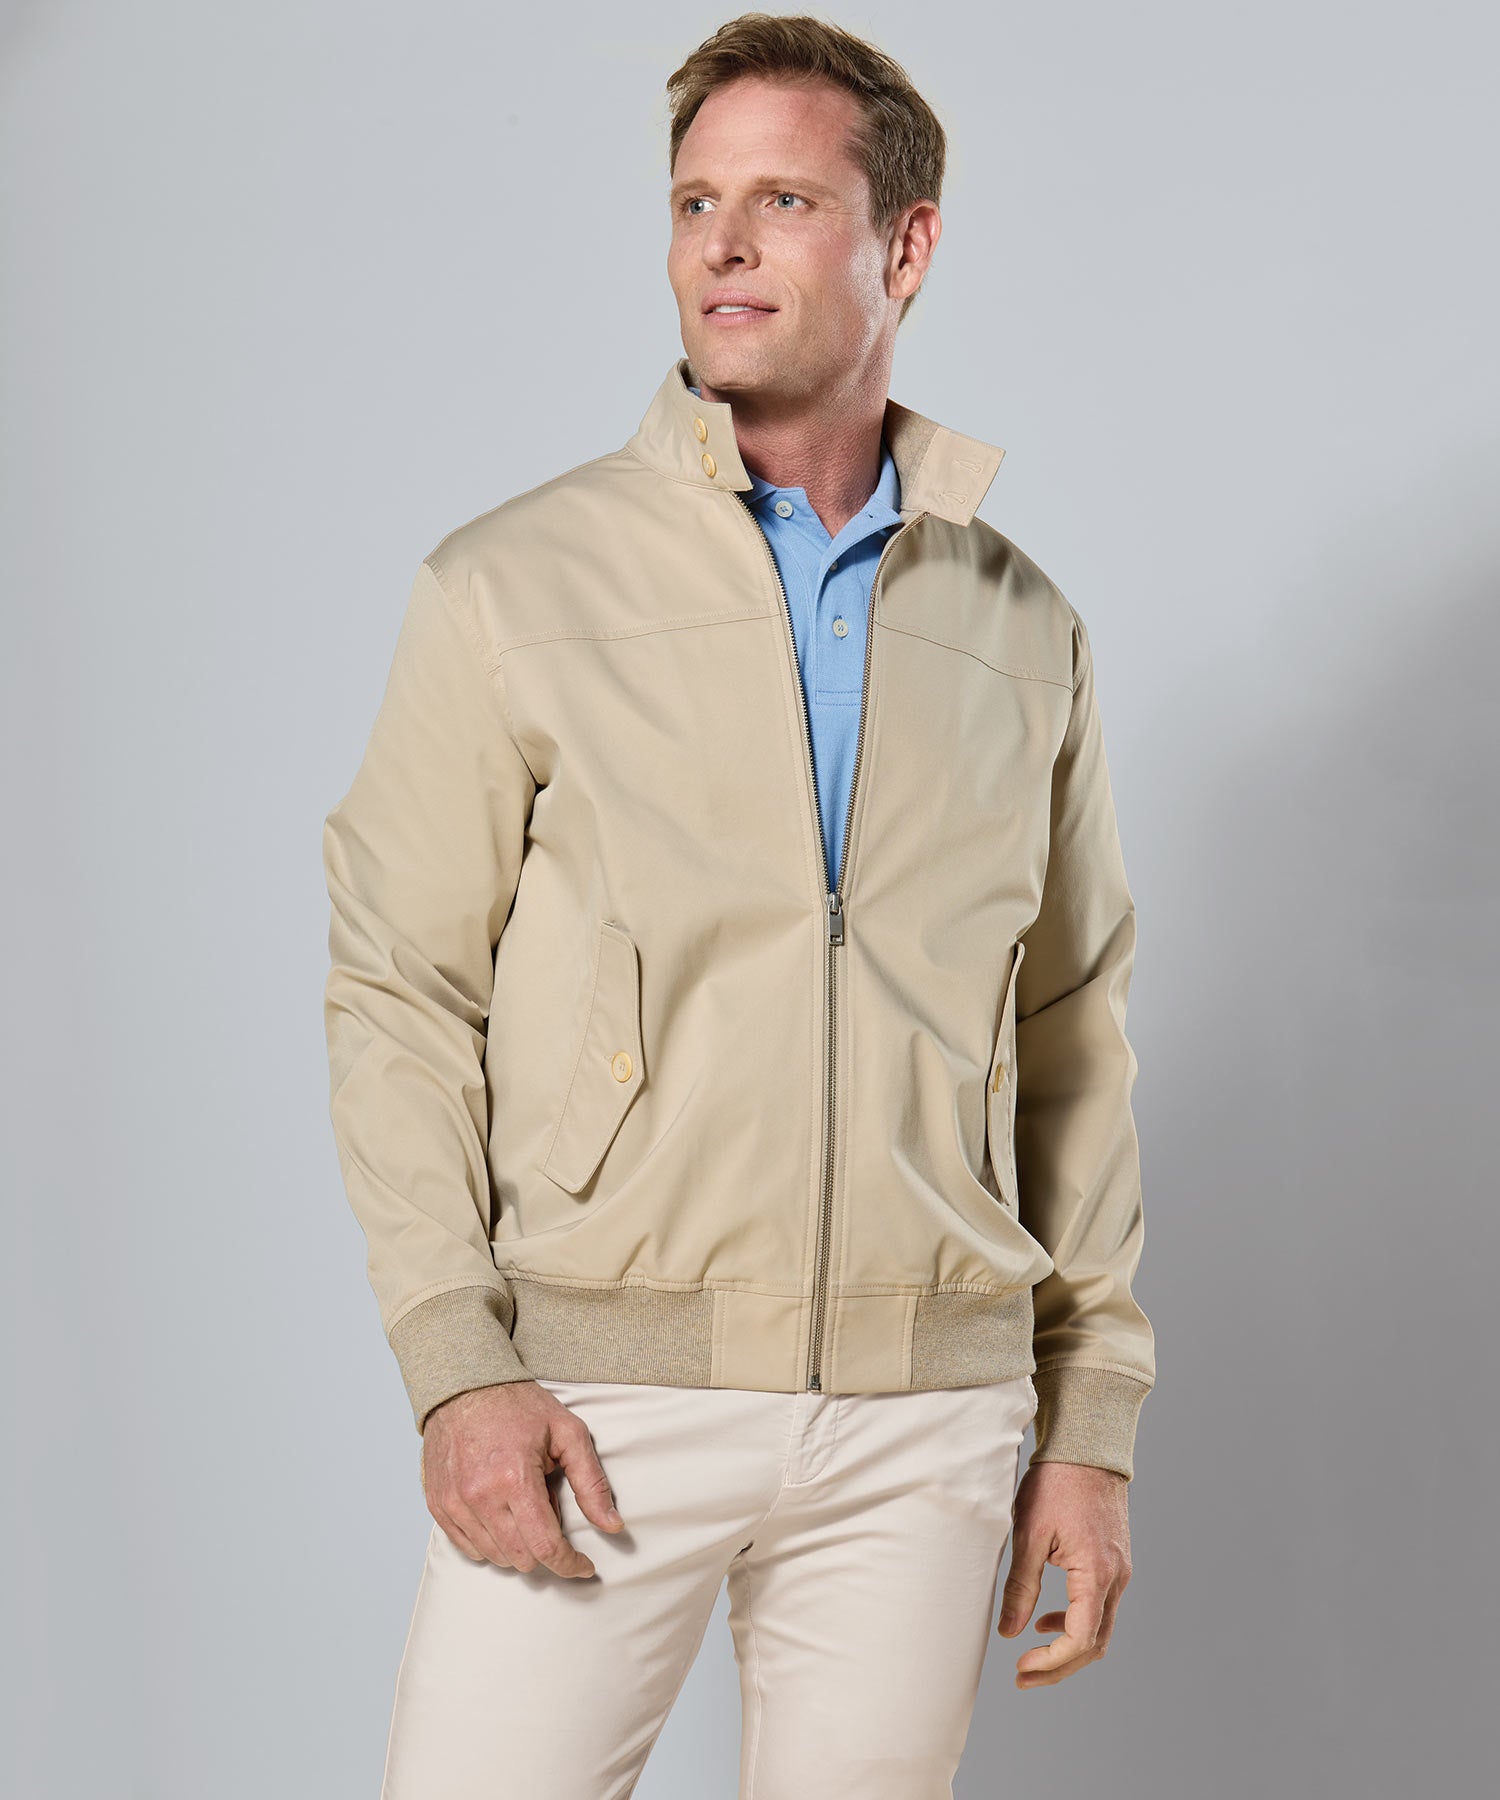 Trient Golf Jacket with Plaid Lining Stone / M